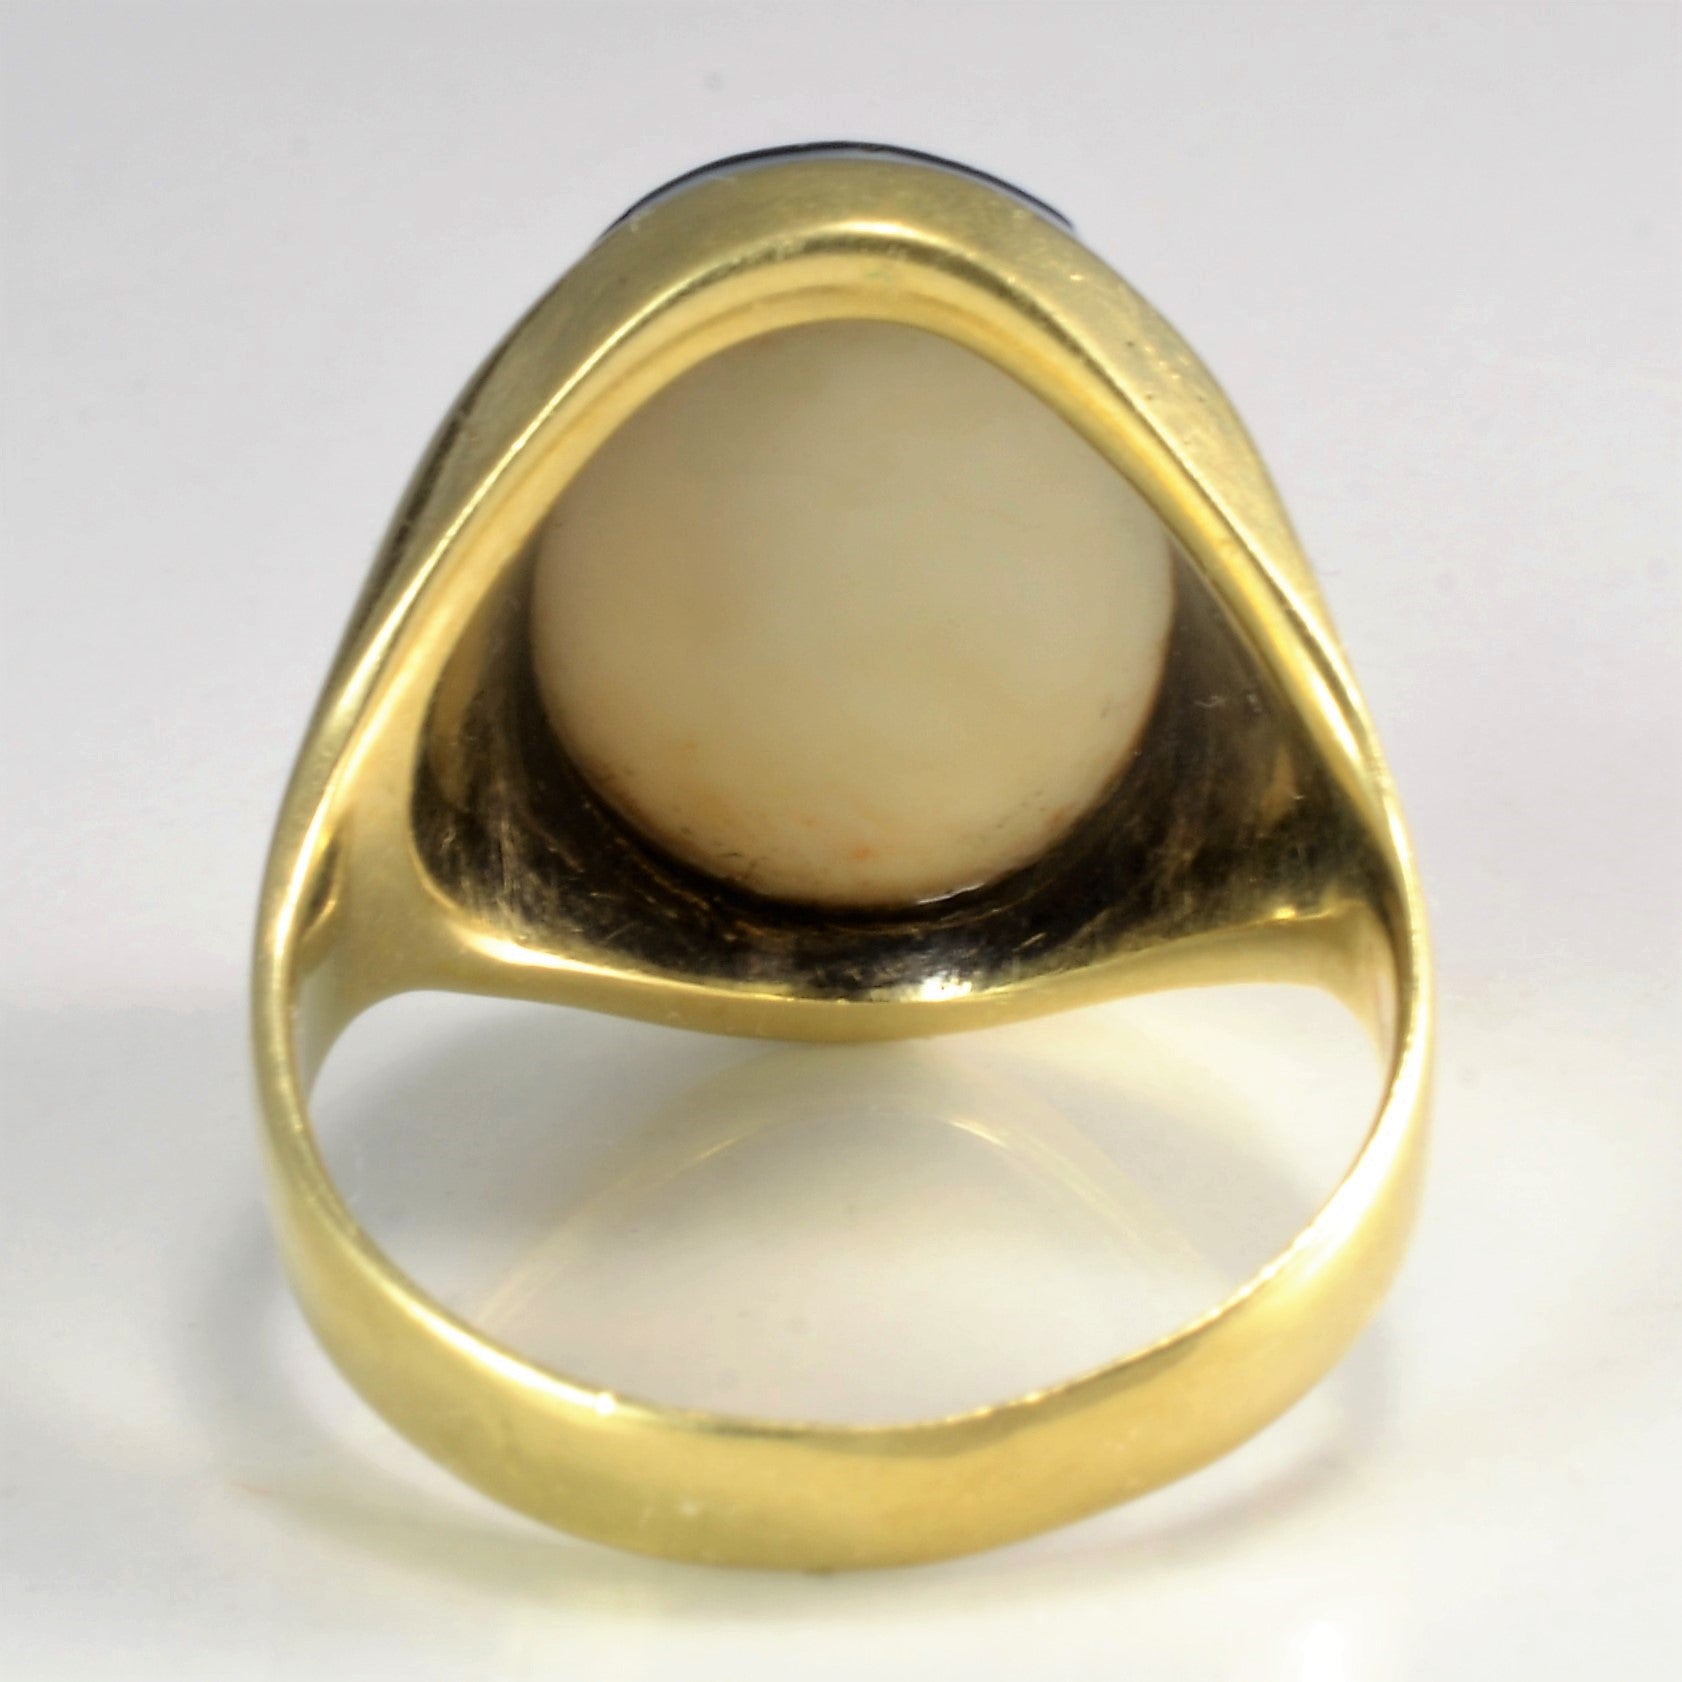 Gold Cameo Shell Ring | SZ 6.25 |